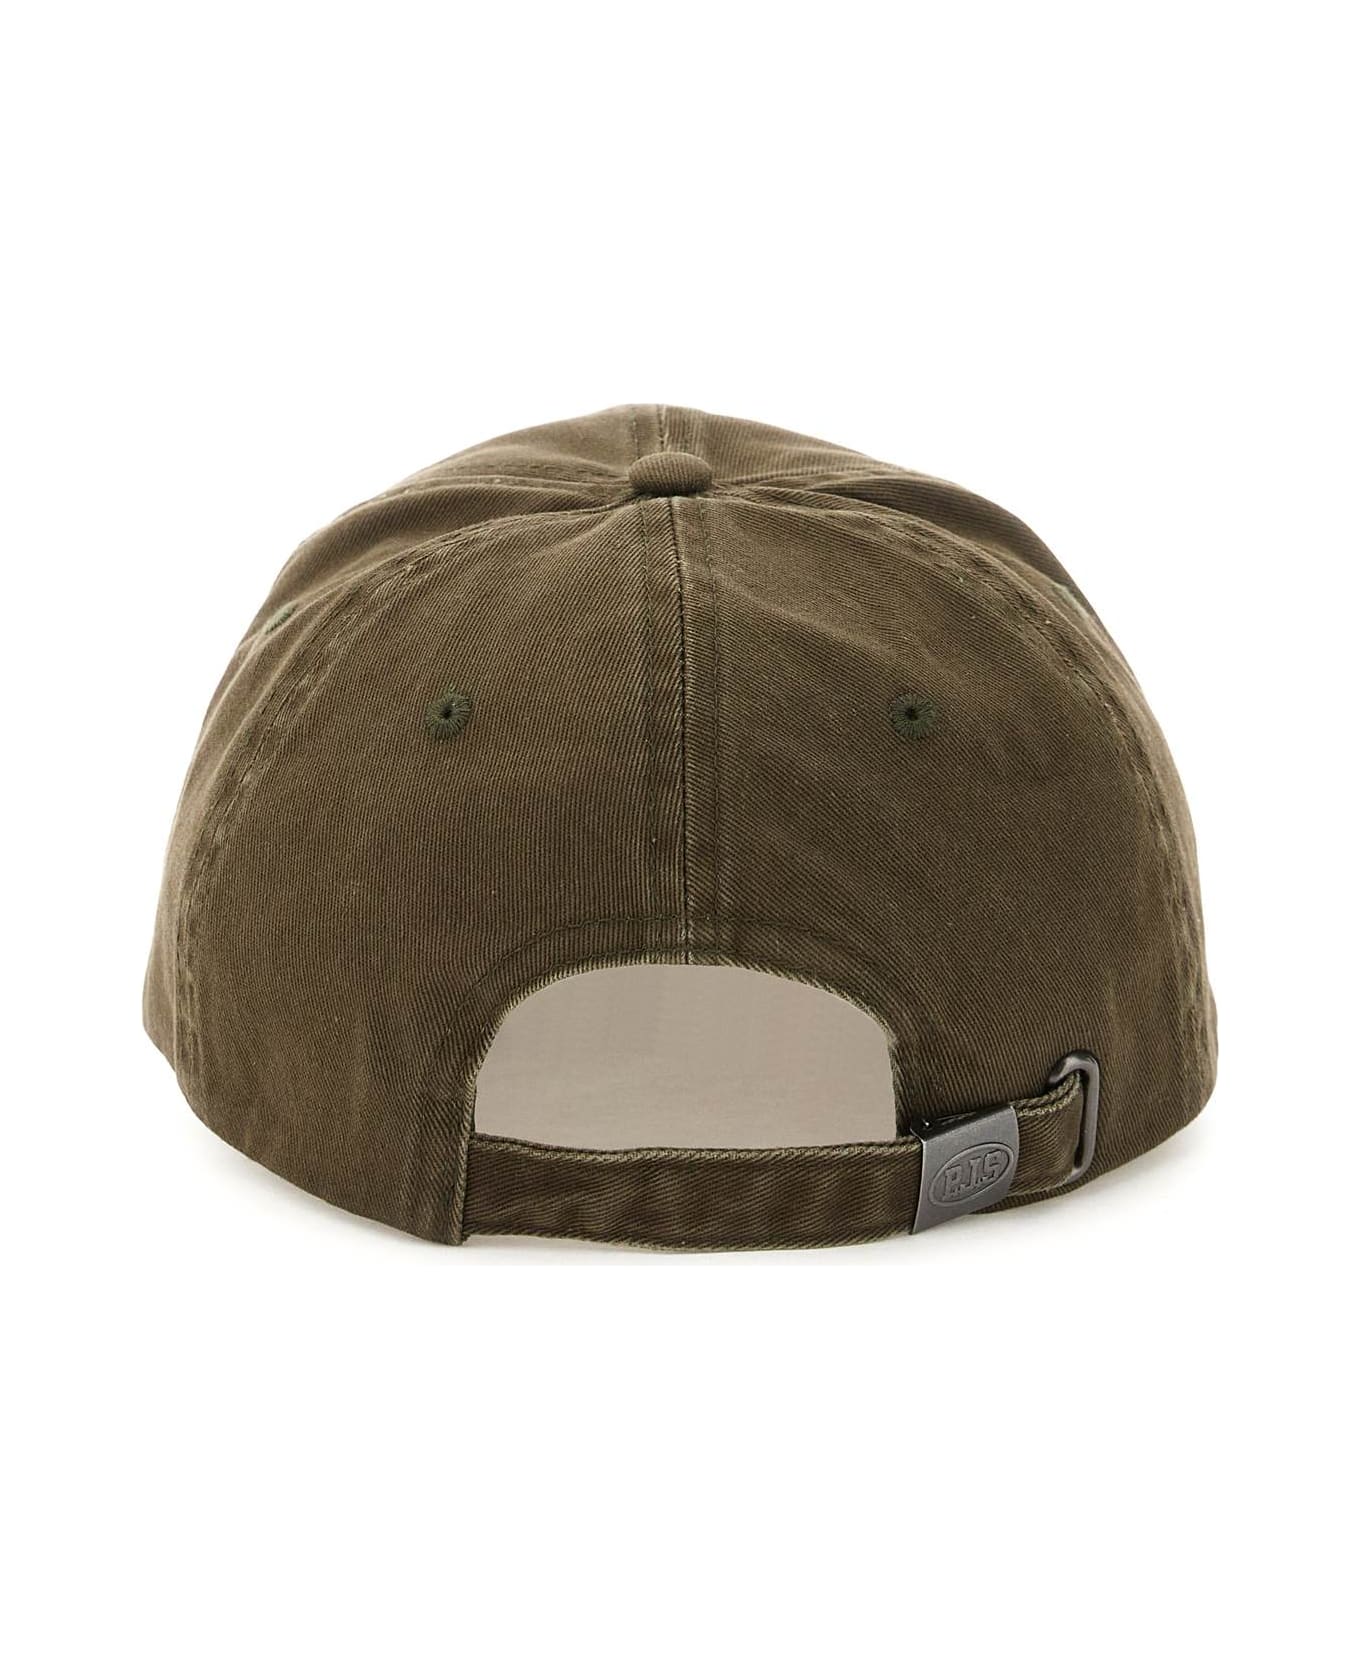 Parajumpers Baseball Cap With Embroidery - SURPLUS GREEN (Green)